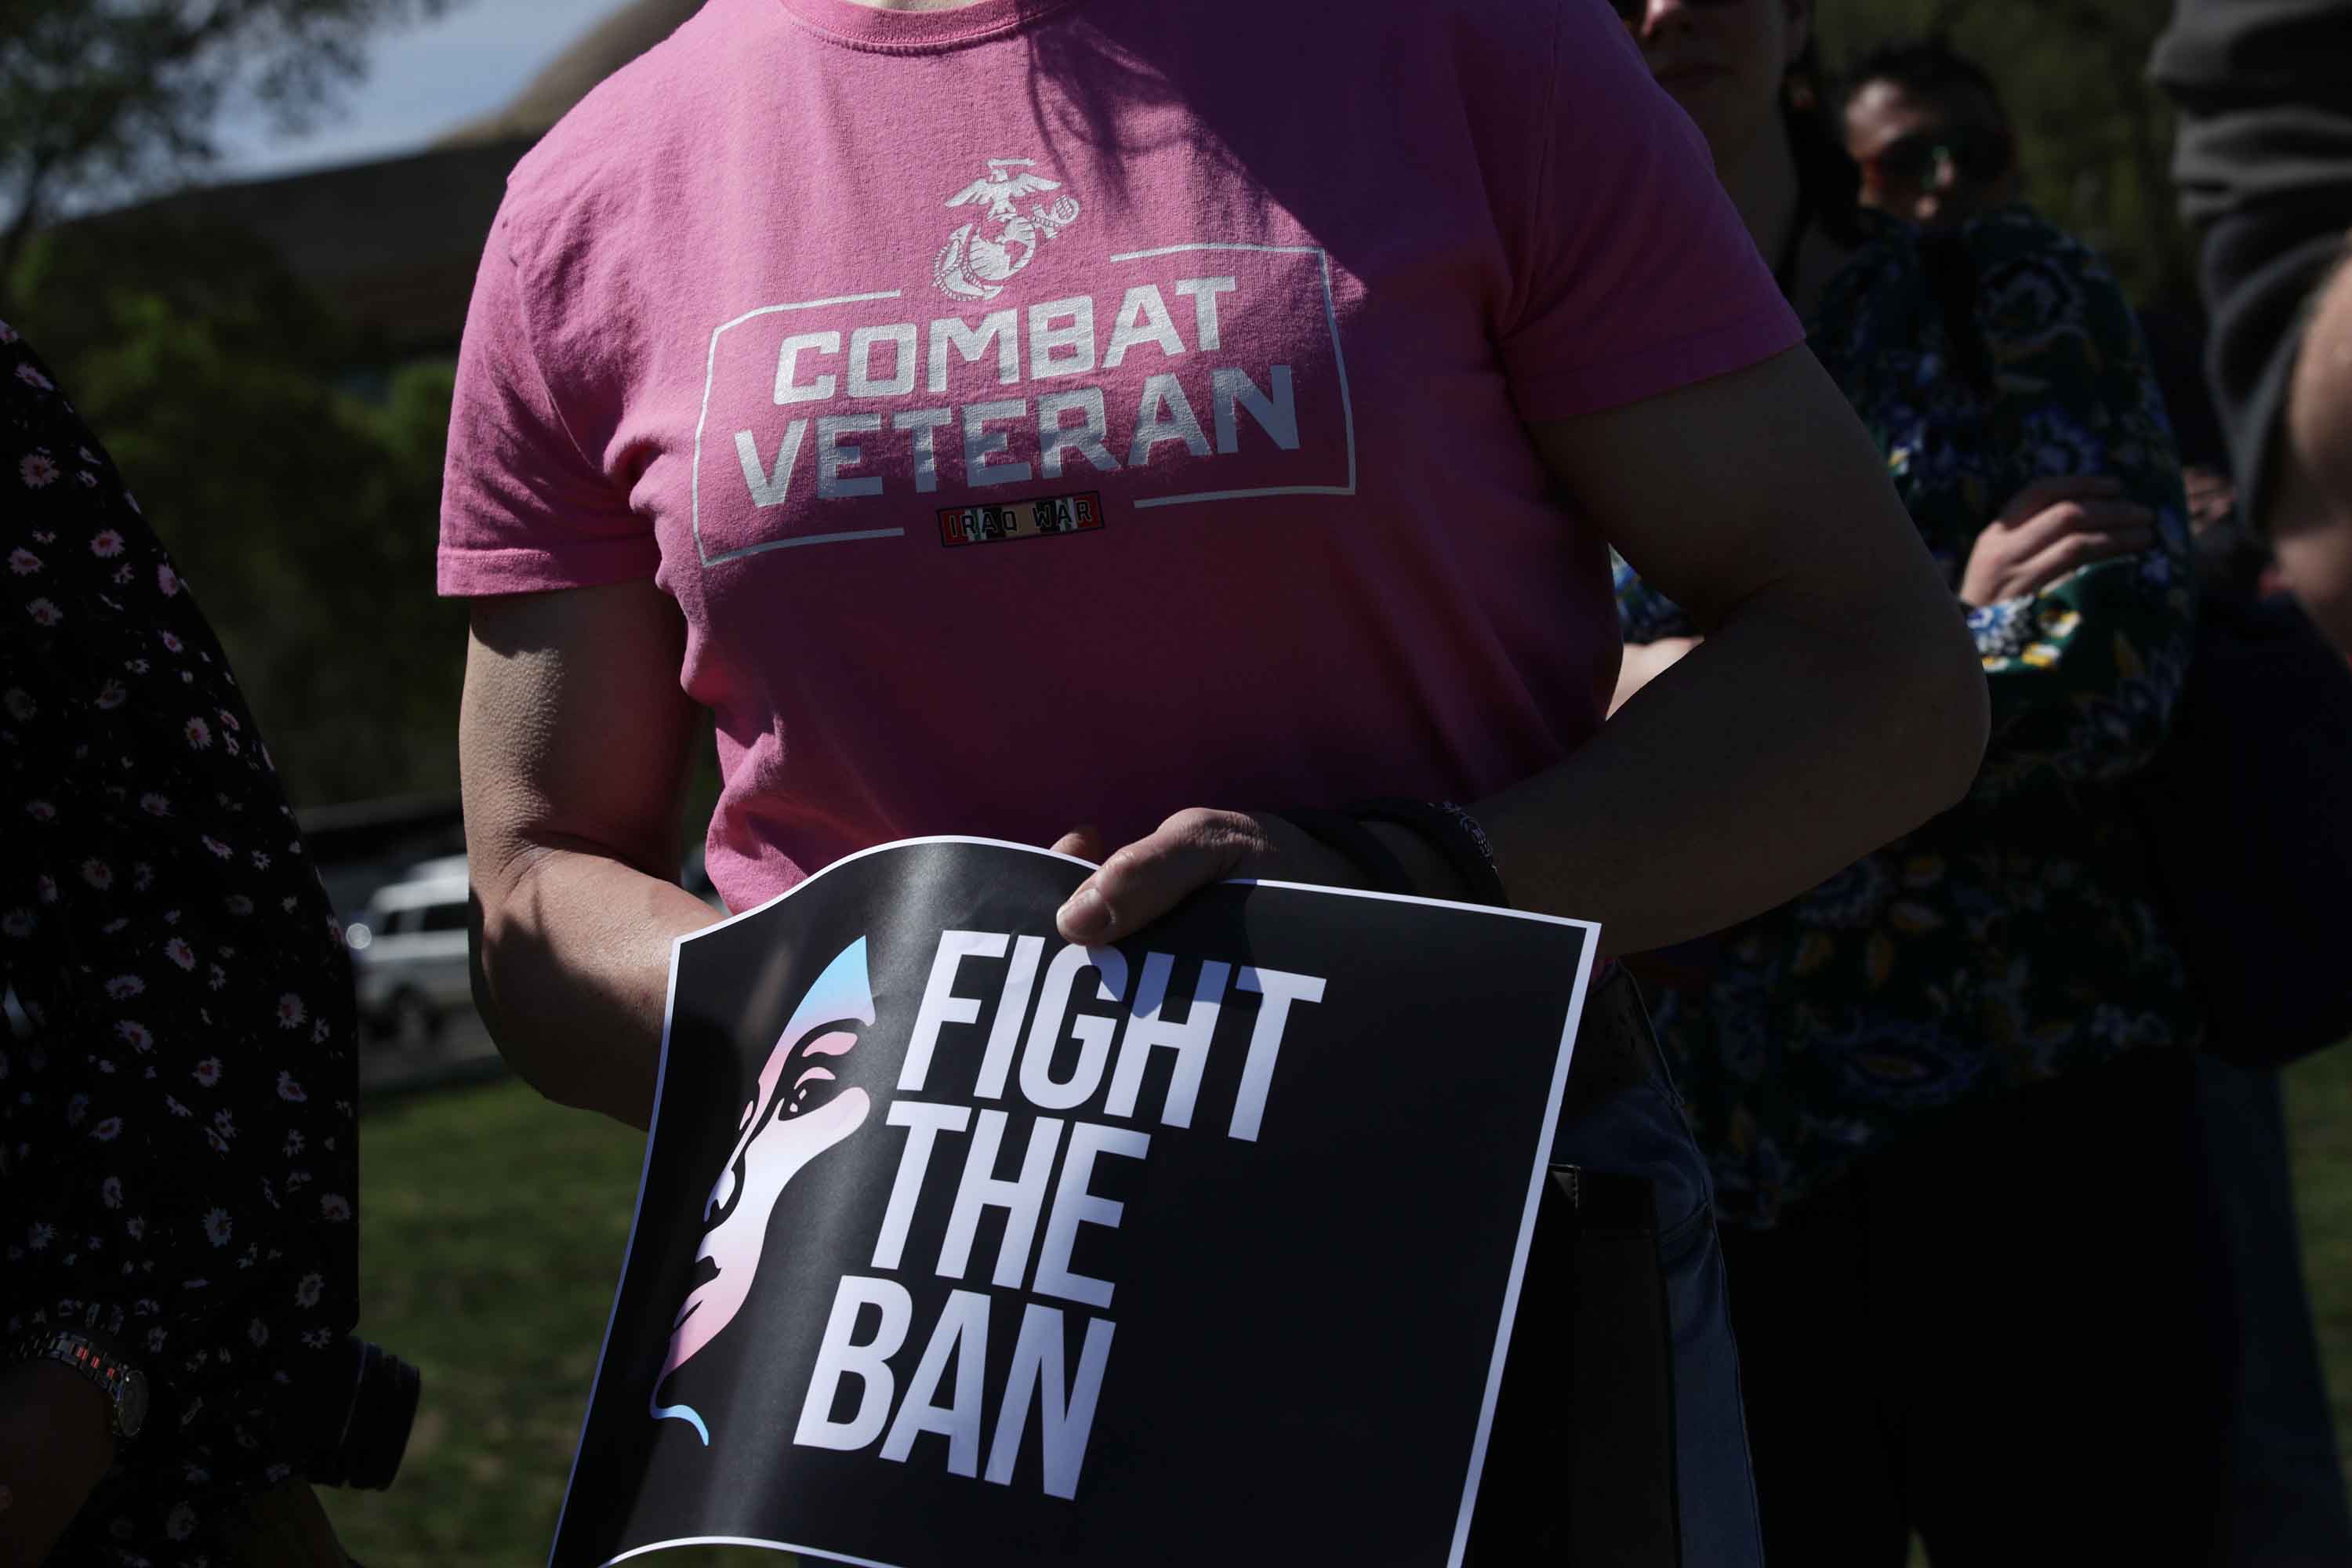 Activists participate in a rally against the Trump administration's transgender military ban in Washington, D.C., on April 10, 2019.